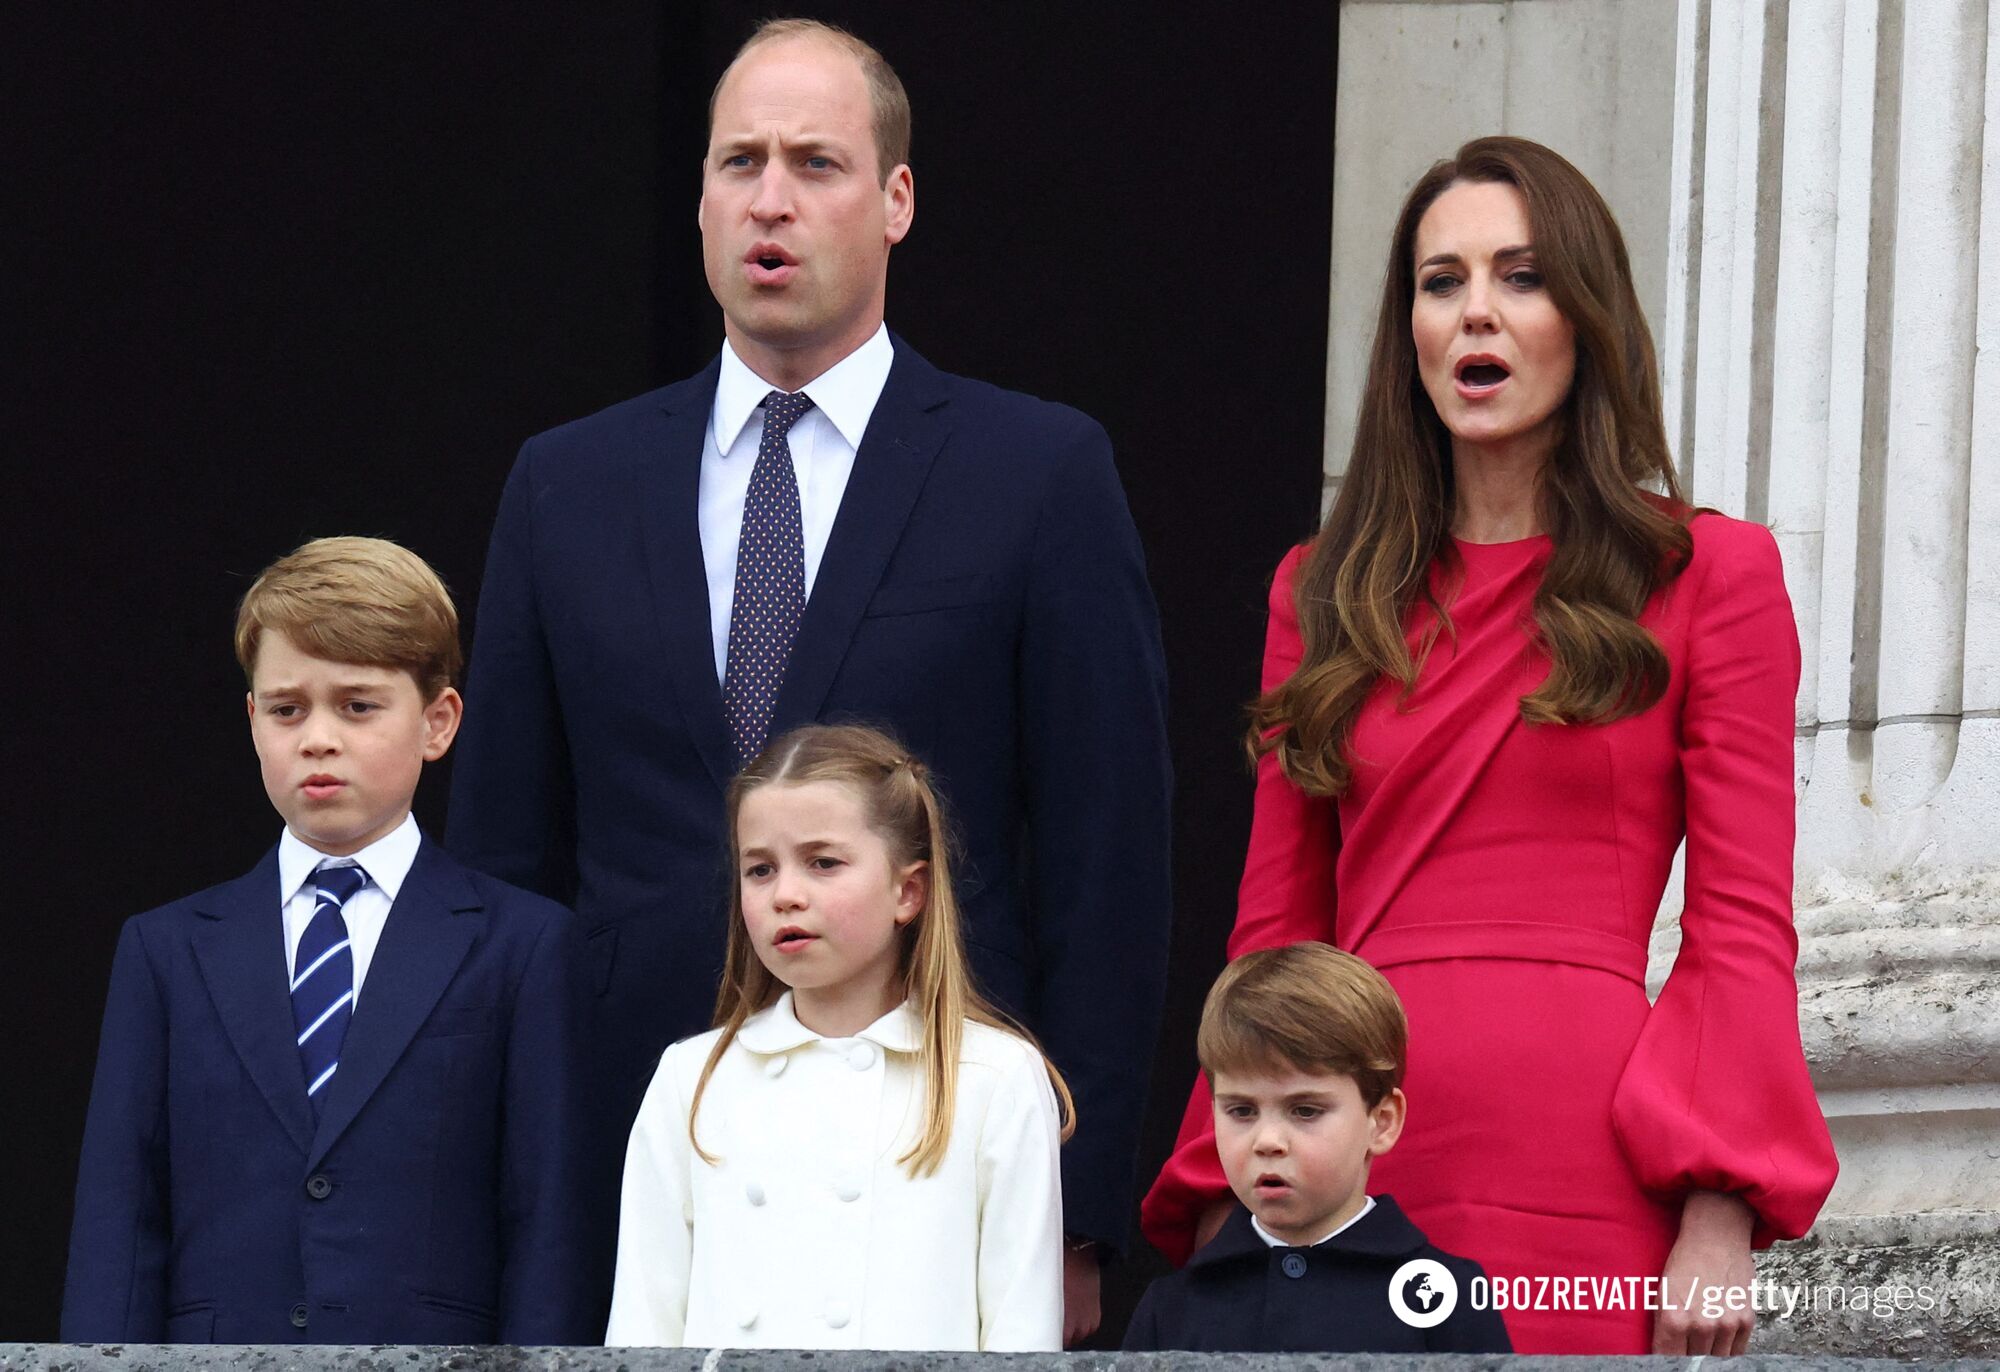 Kate Middleton, who is fighting cancer, was spotted walking with her family